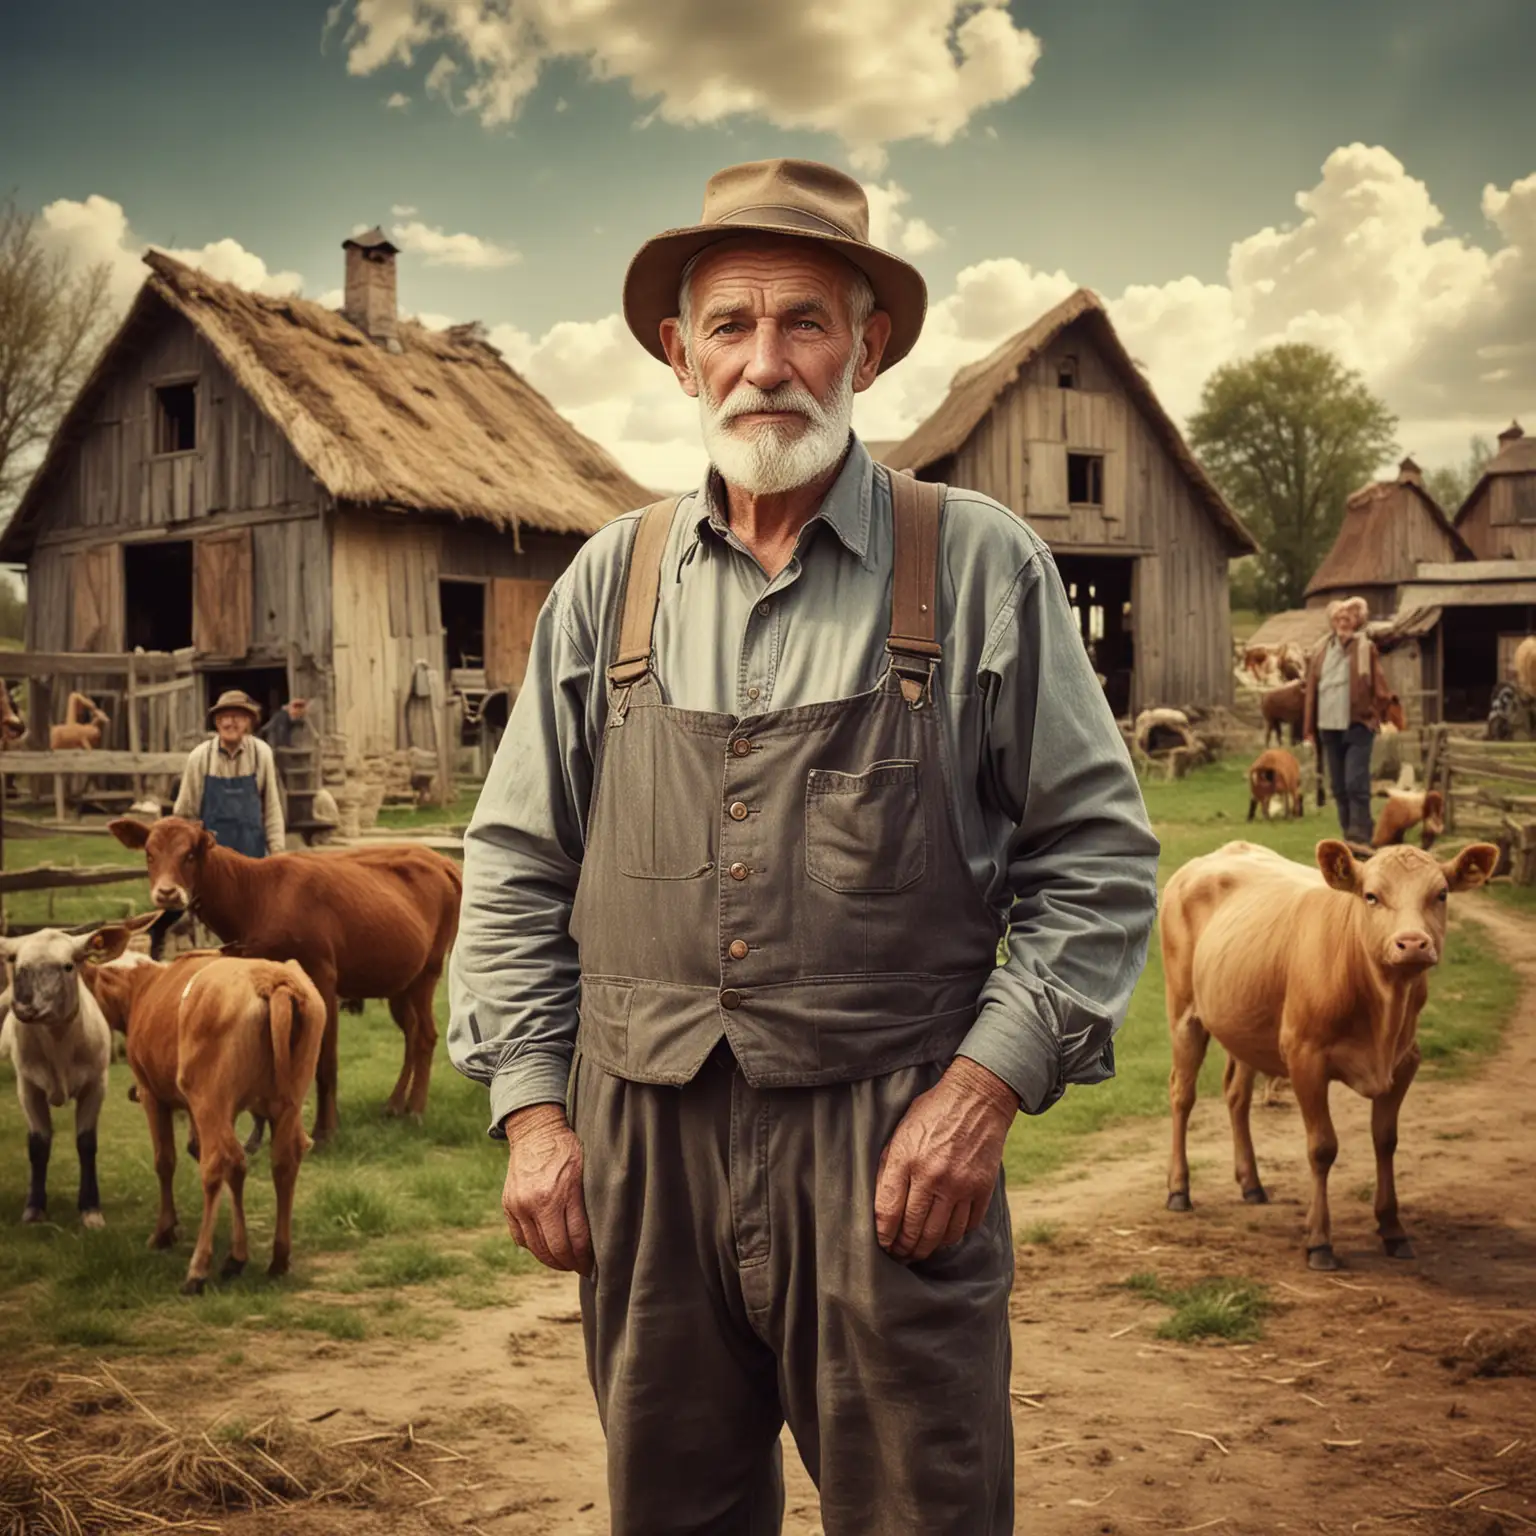 vintage old man farmer with with farm buildings and animals in the background